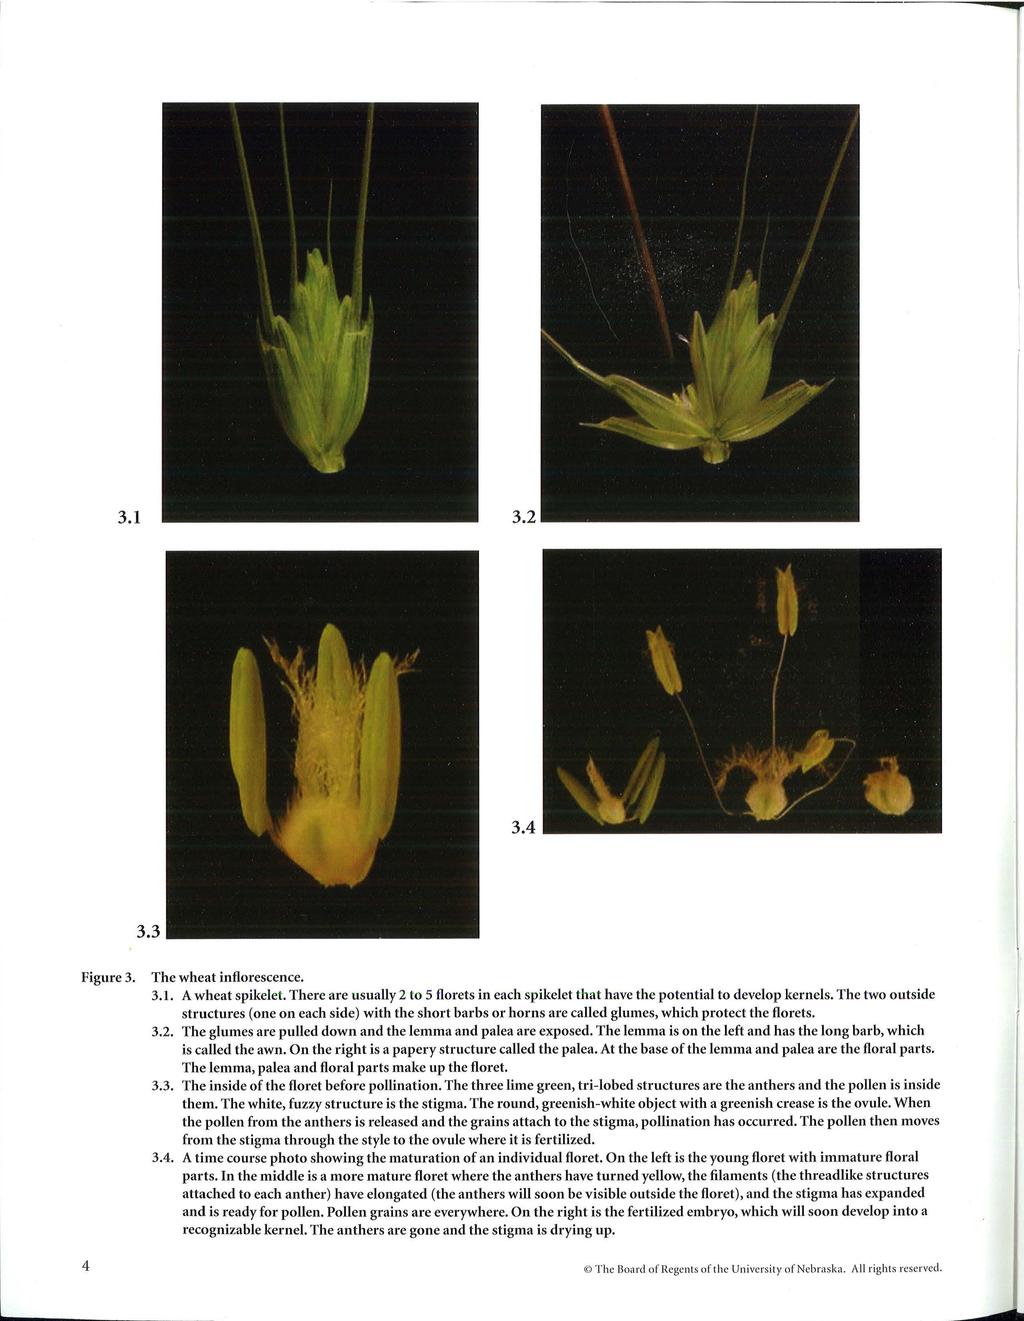 3.1 3.2 3.4 3.3 Figure 3. The wheat inflorescence. 3.1. A wheat spikelet. There are usually 2 to 5 florets in each spikelet that have the potential to develop kernels.